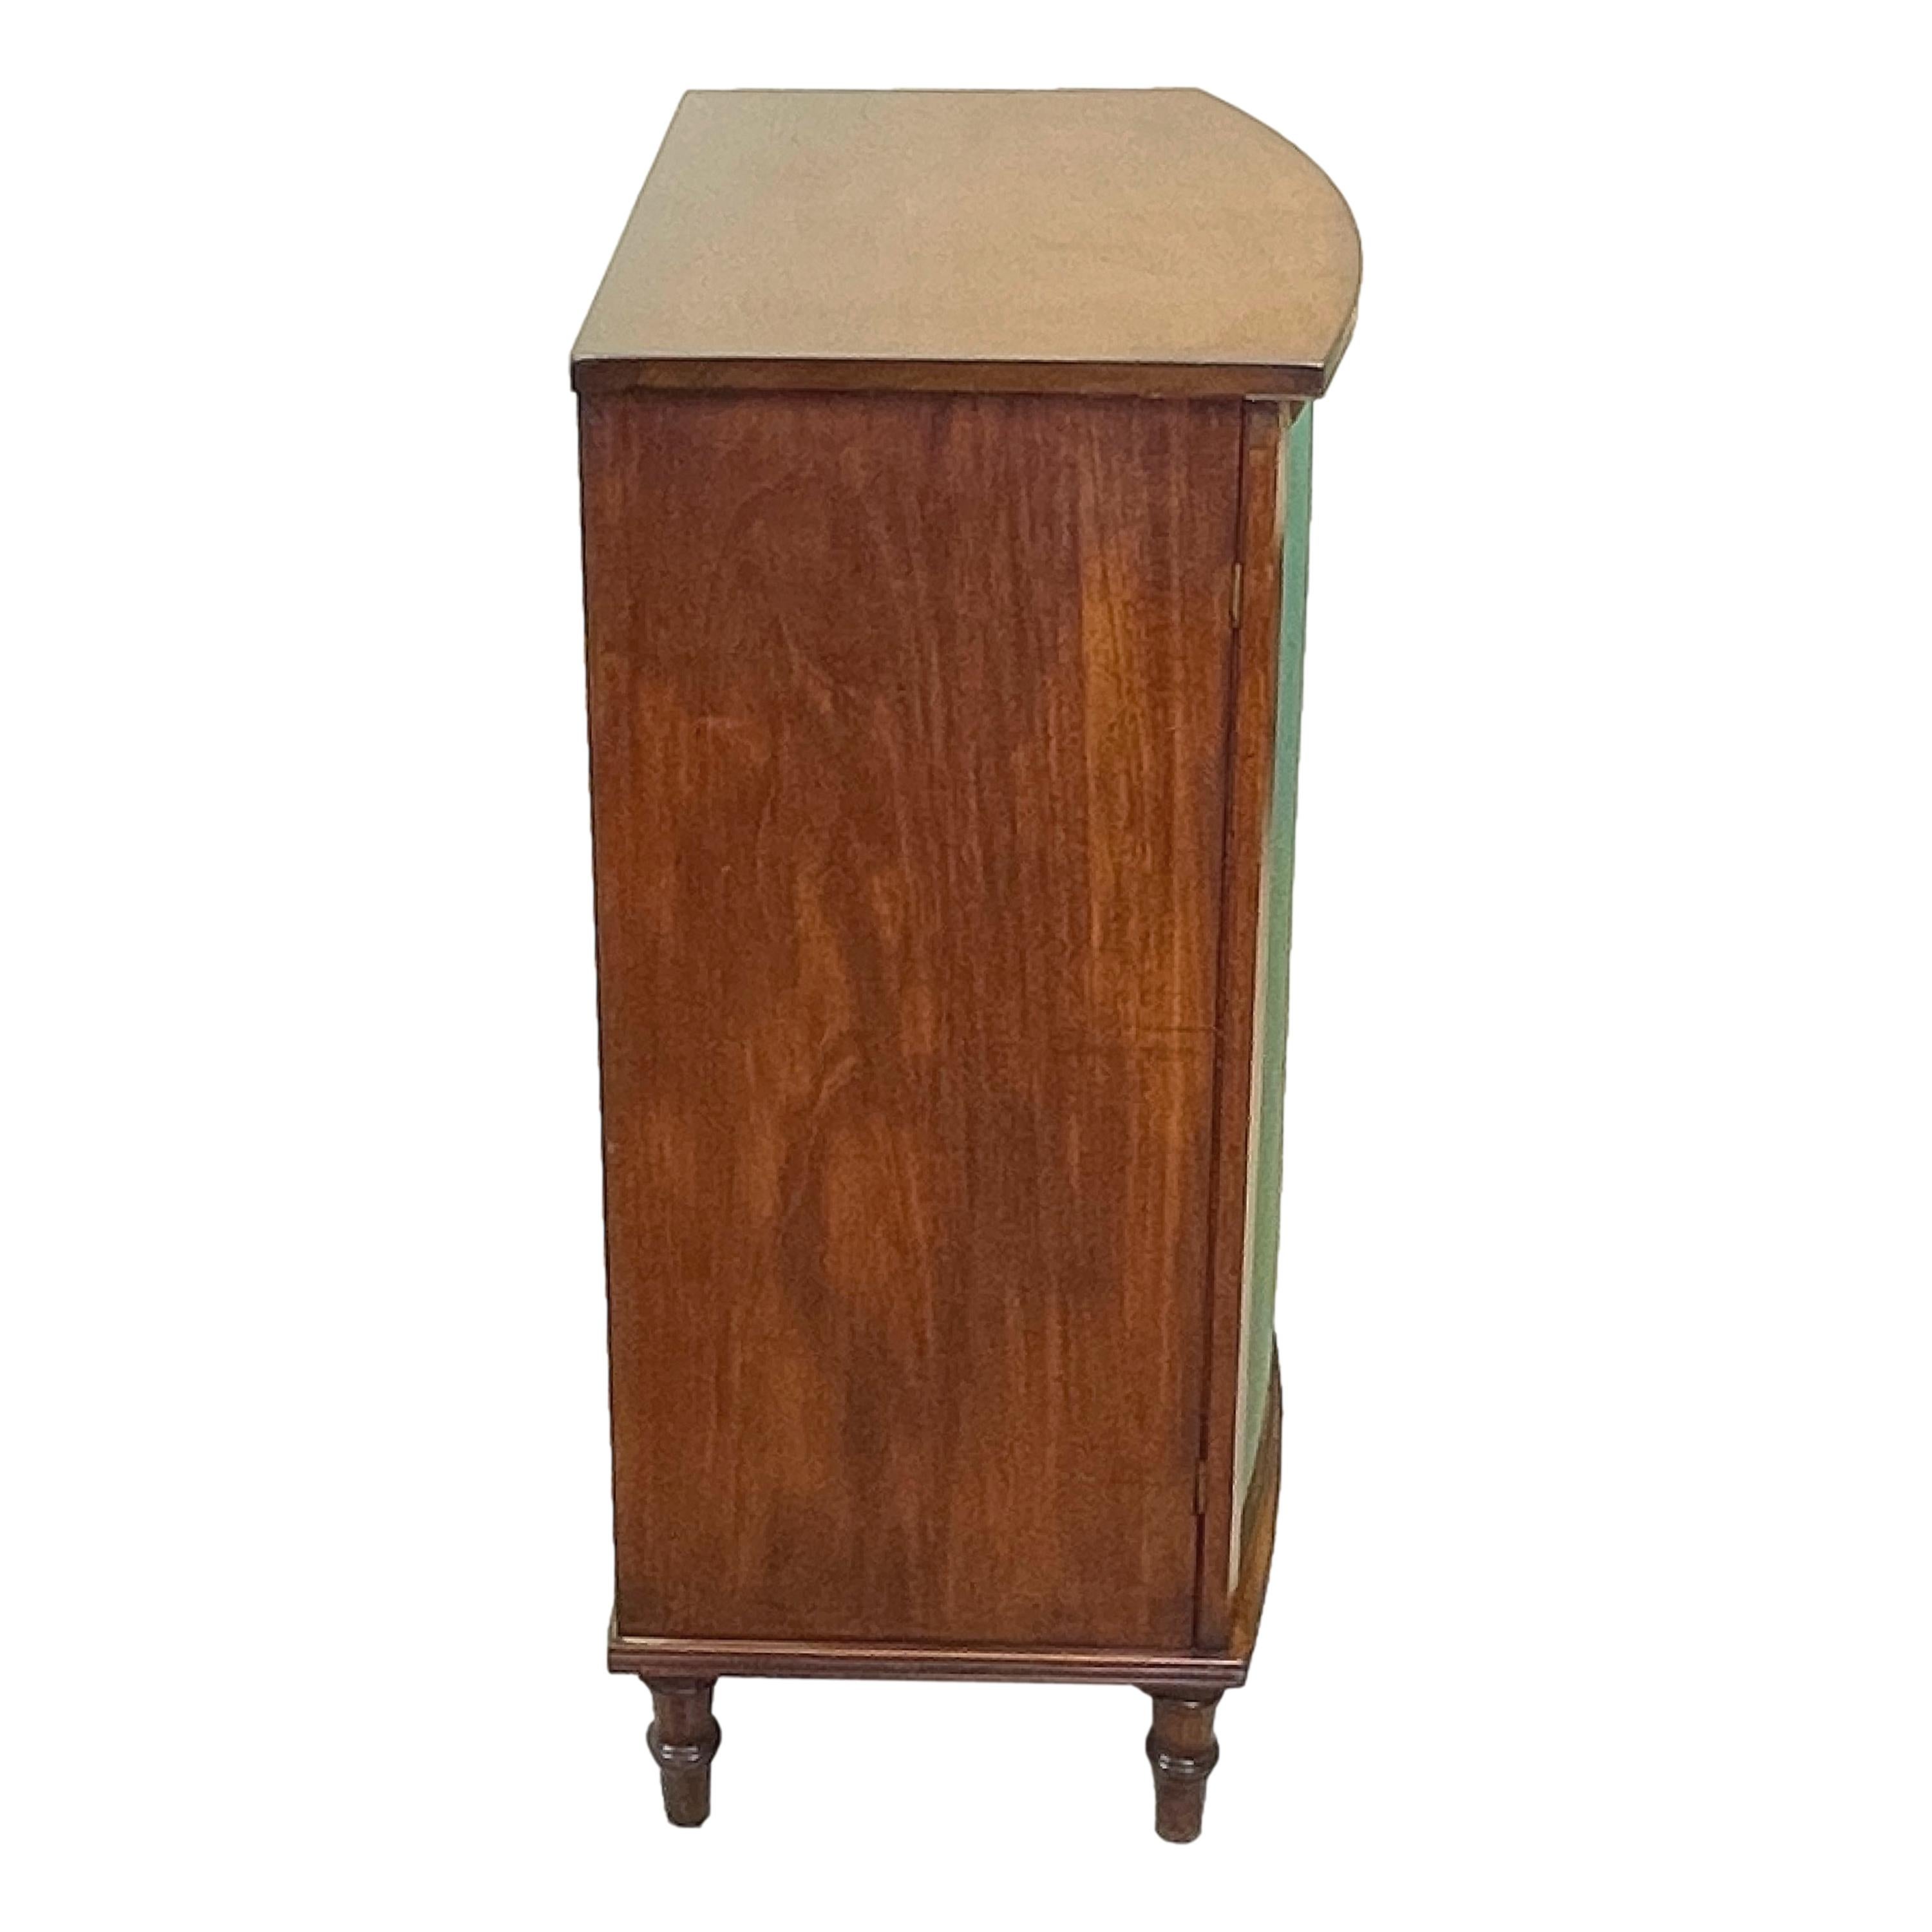 A good quality Regency period mahogany bowfronted
Side cabinet, or side cupboard, having well figured top
Over two silk panelled doors enclosing interior shelves
Raised on elegant turned tapering feet

(Both elegant and functional this side